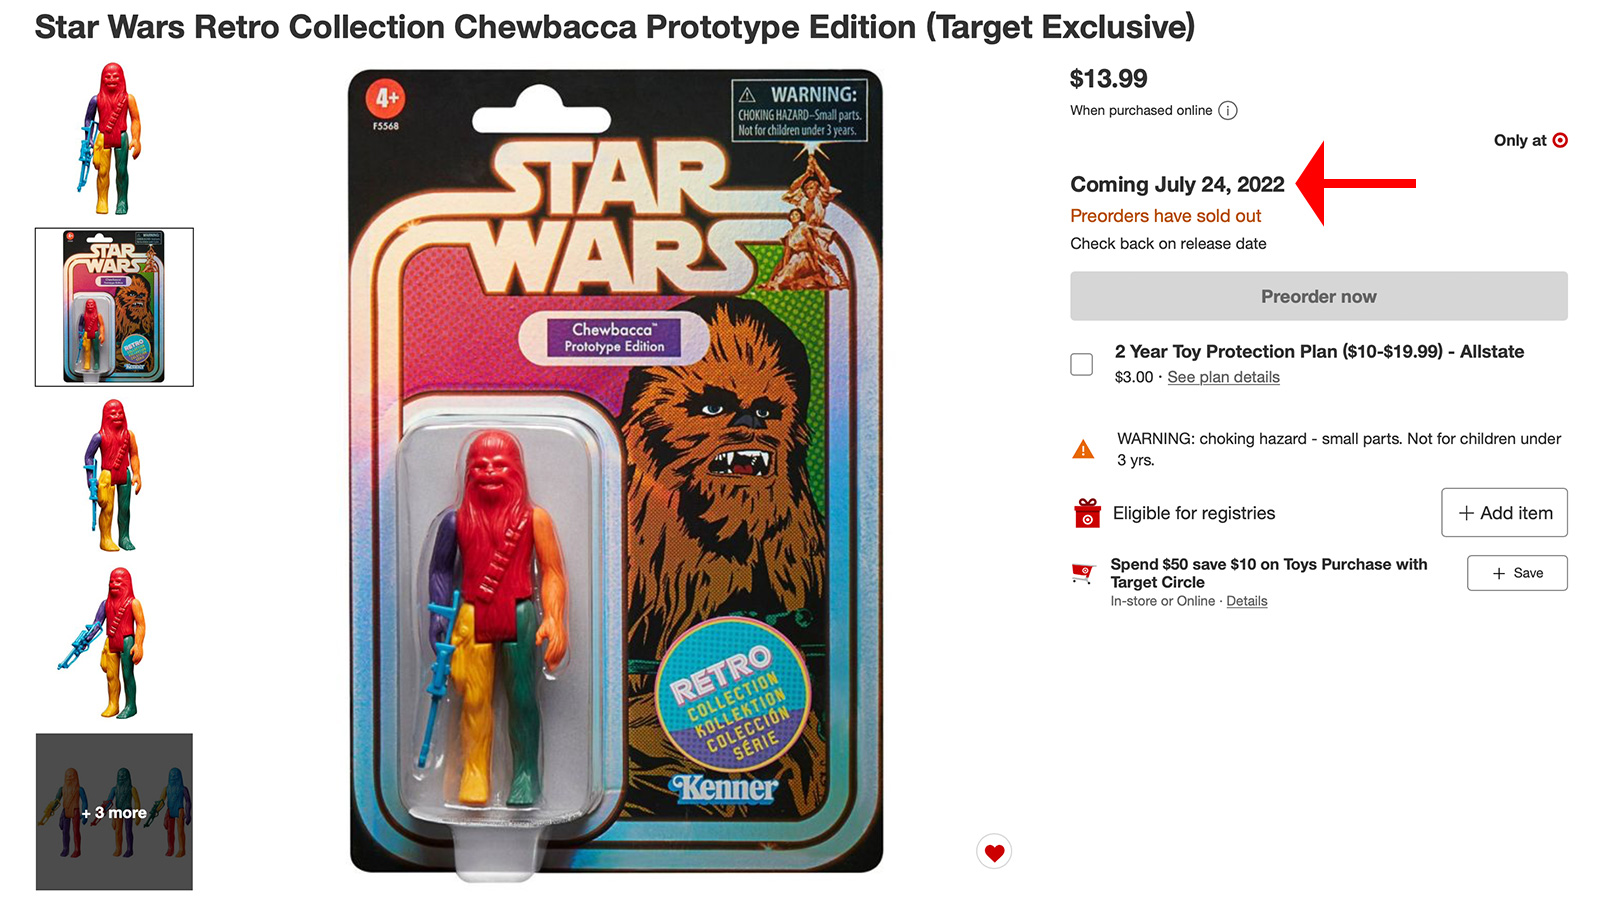 Street Date For Target Exclusive Retro Collection Chewbacca Prototype Edition Figure